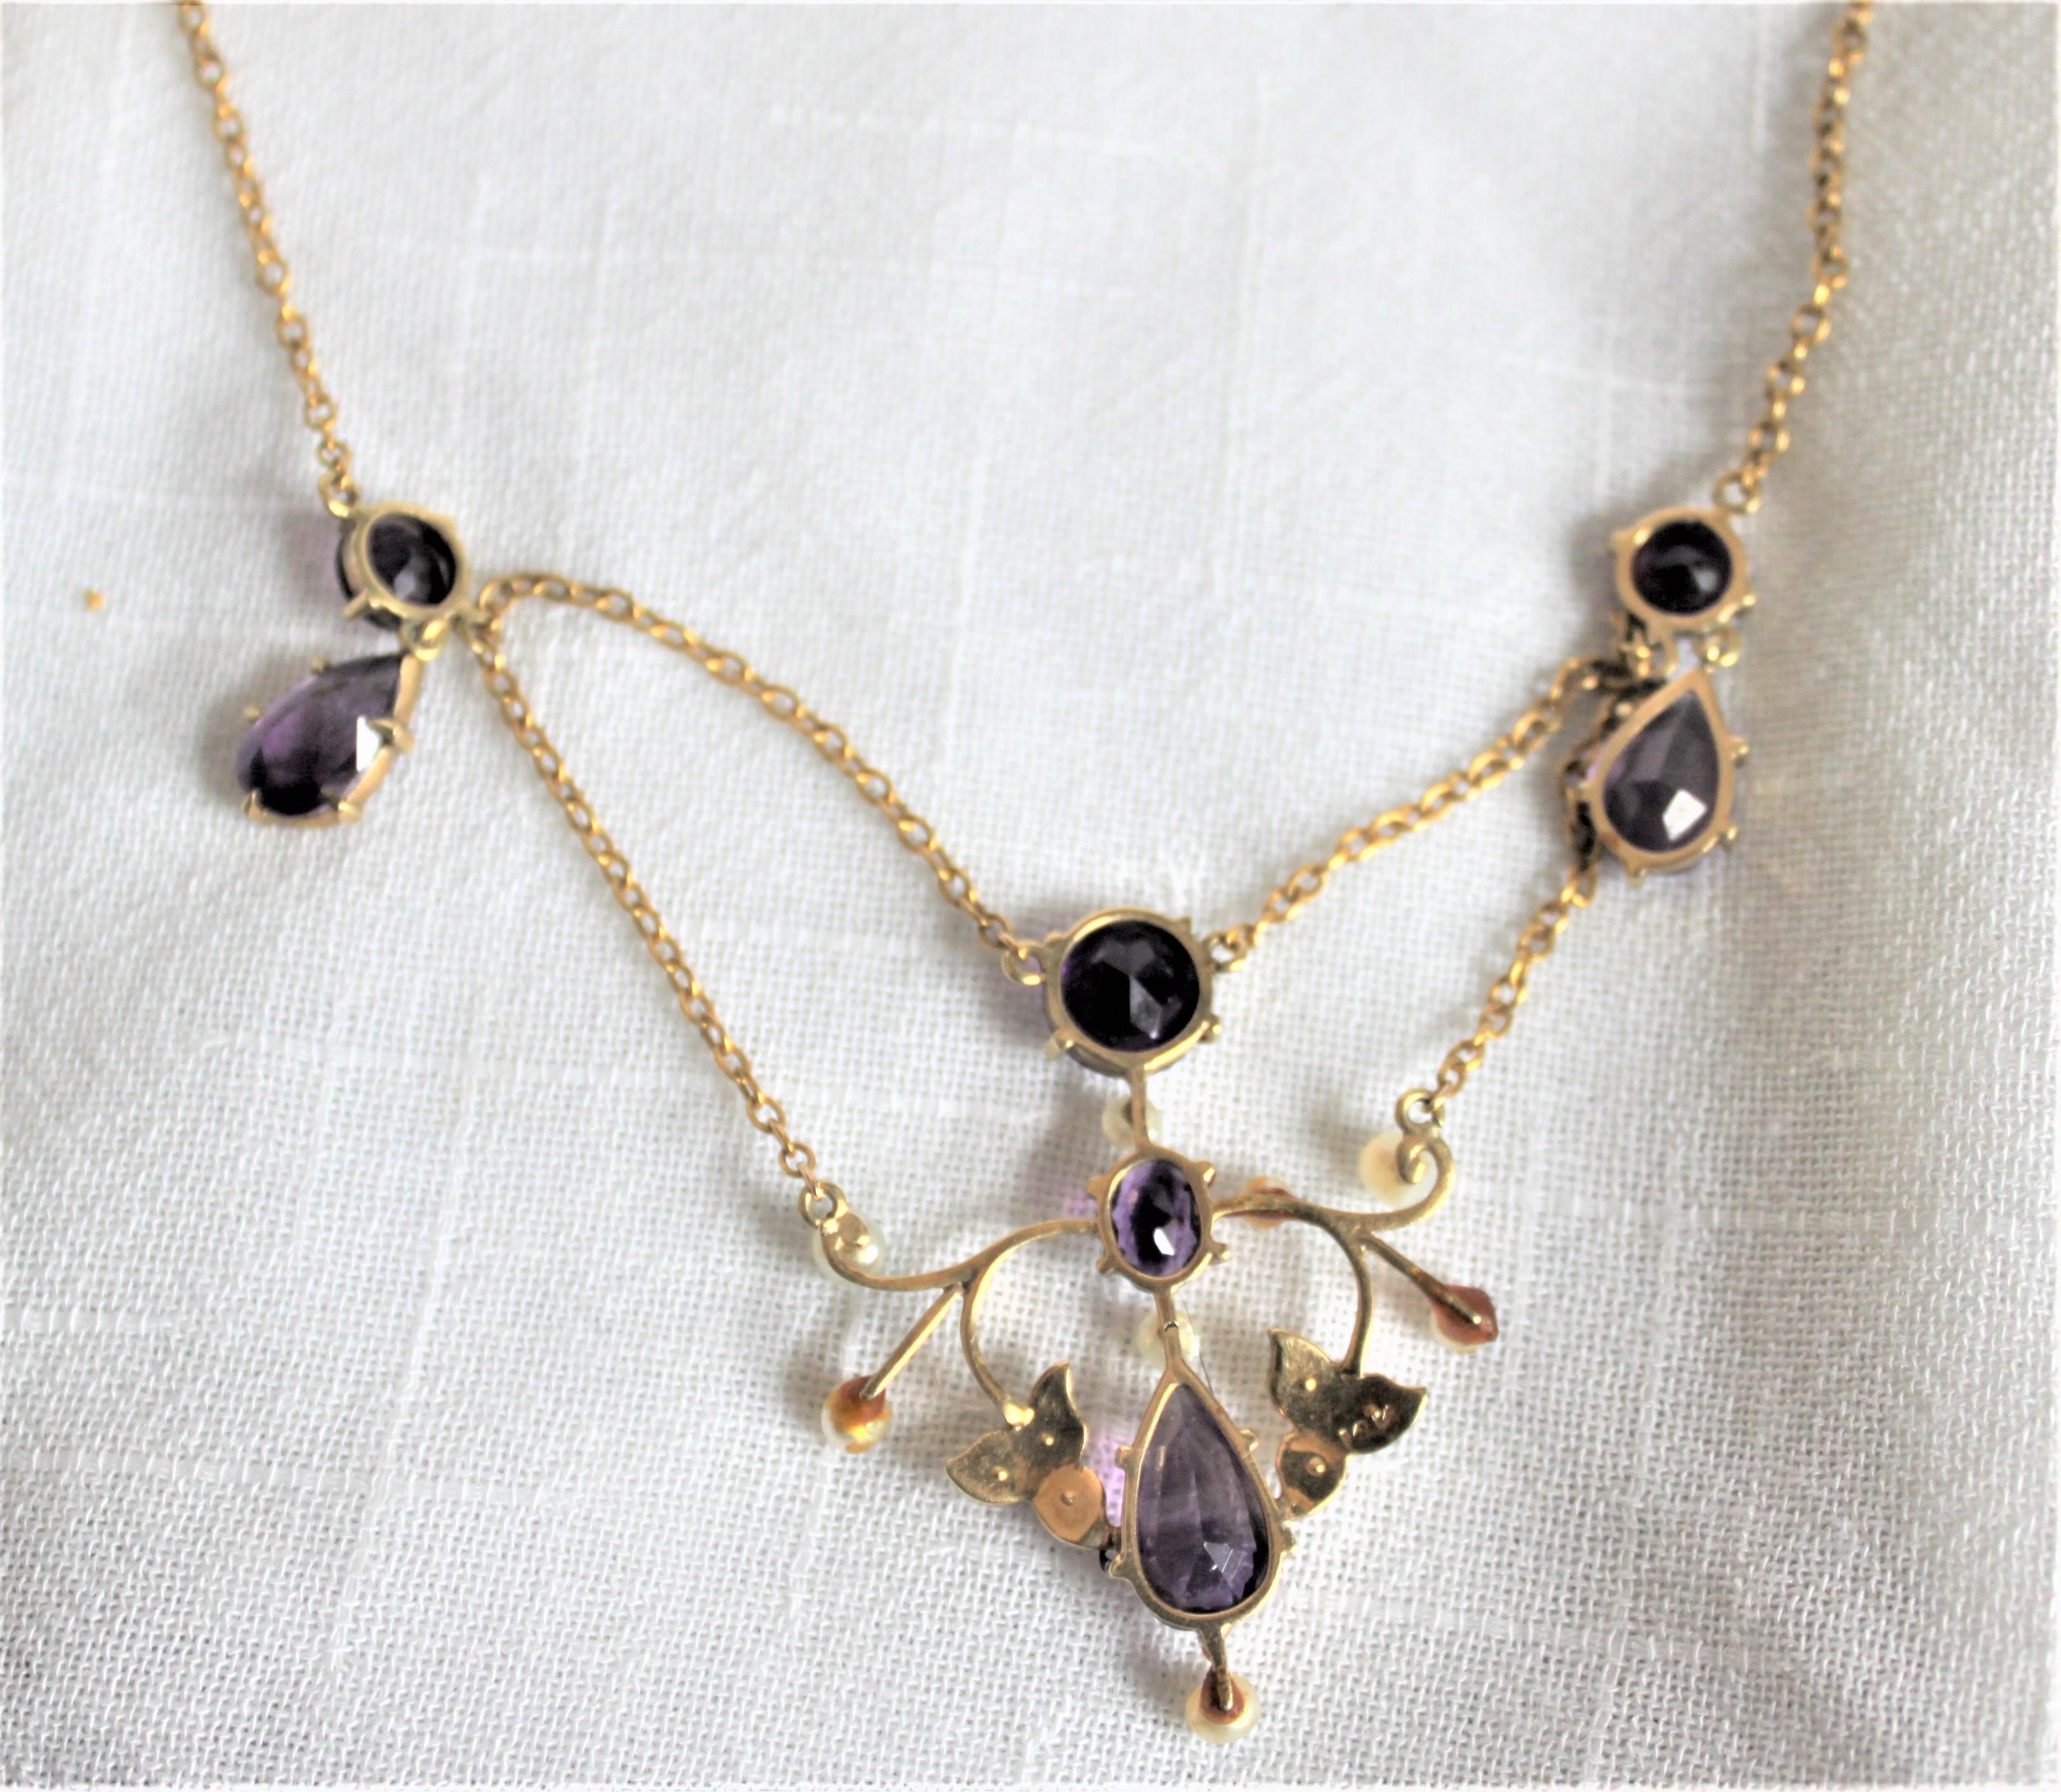 Antique 14-Karat Yellow Gold, Amethyst and Seed Pearl Necklace and Brooch For Sale 4